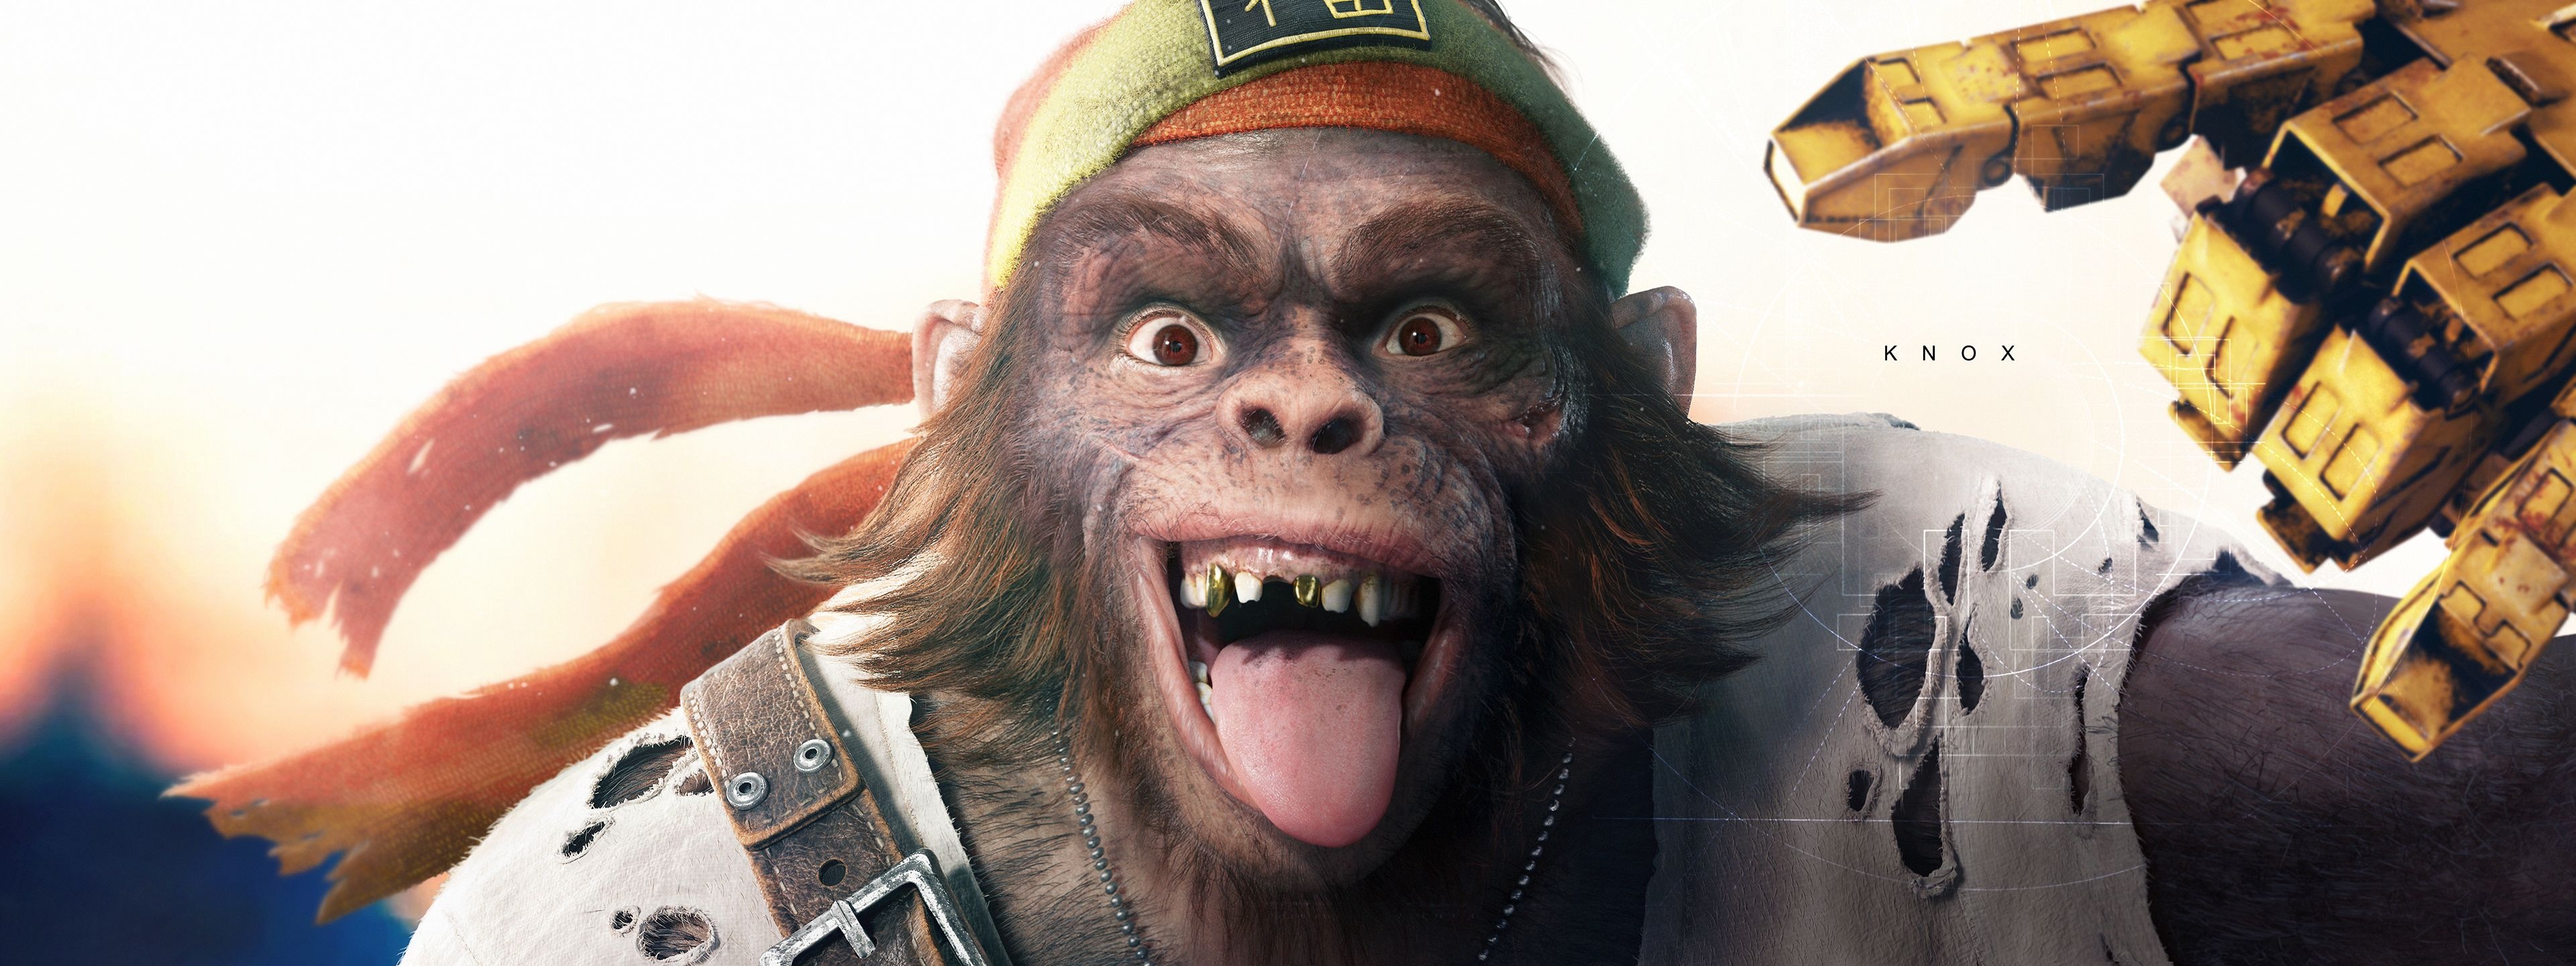 Beyond Good and Evil (Game): Knox, Punk-ass hybrid monkey, 2003 action-adventure, stealth game developed and published by Ubisoft. 3840x1440 Dual Screen Wallpaper.